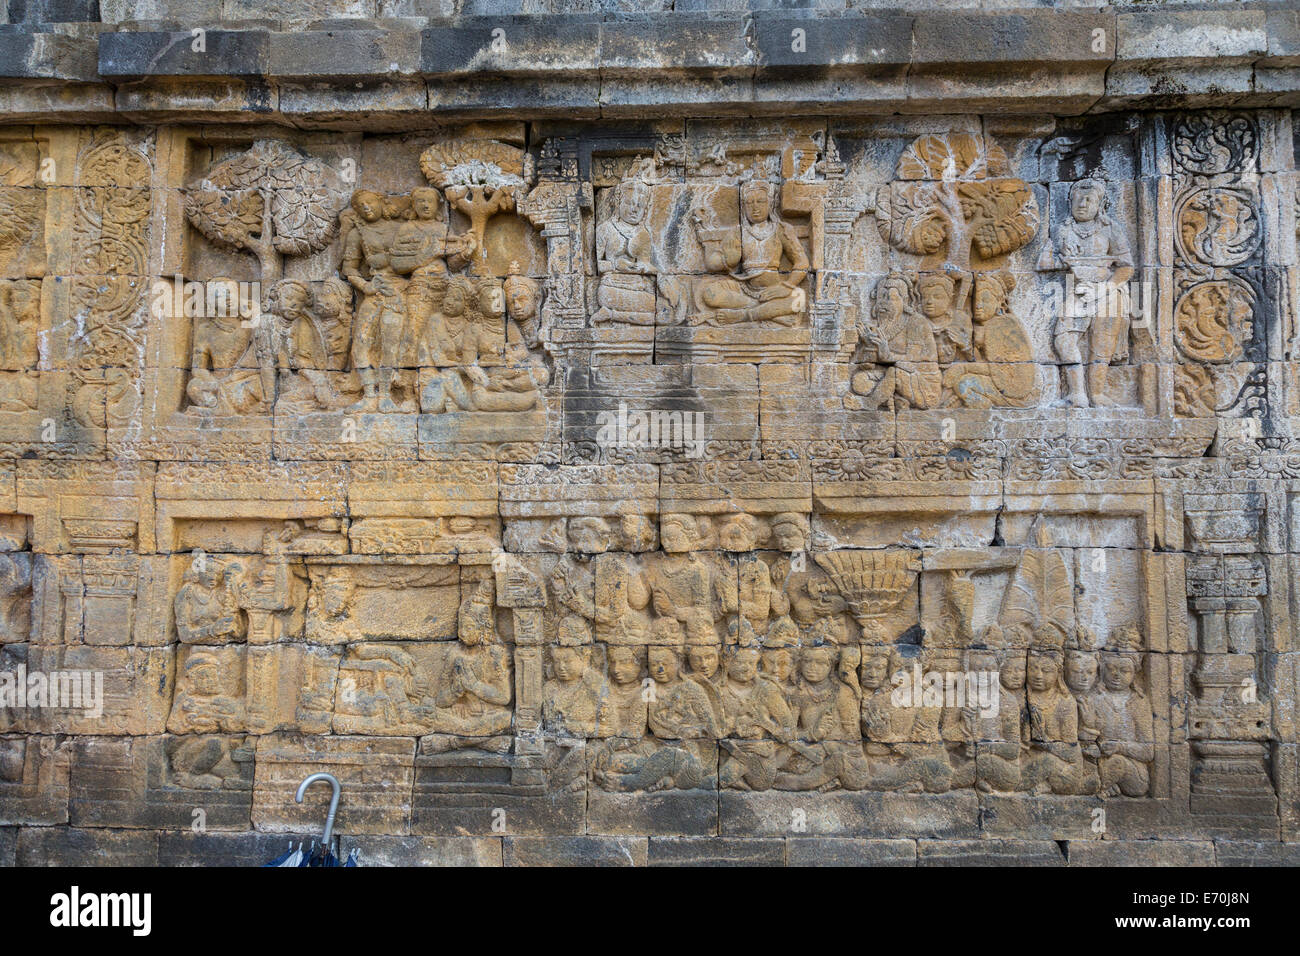 Borobudur, Java, Indonesia.  Bas-relief Stone Carving Showing Scenes from the Life of the Buddha. Stock Photo